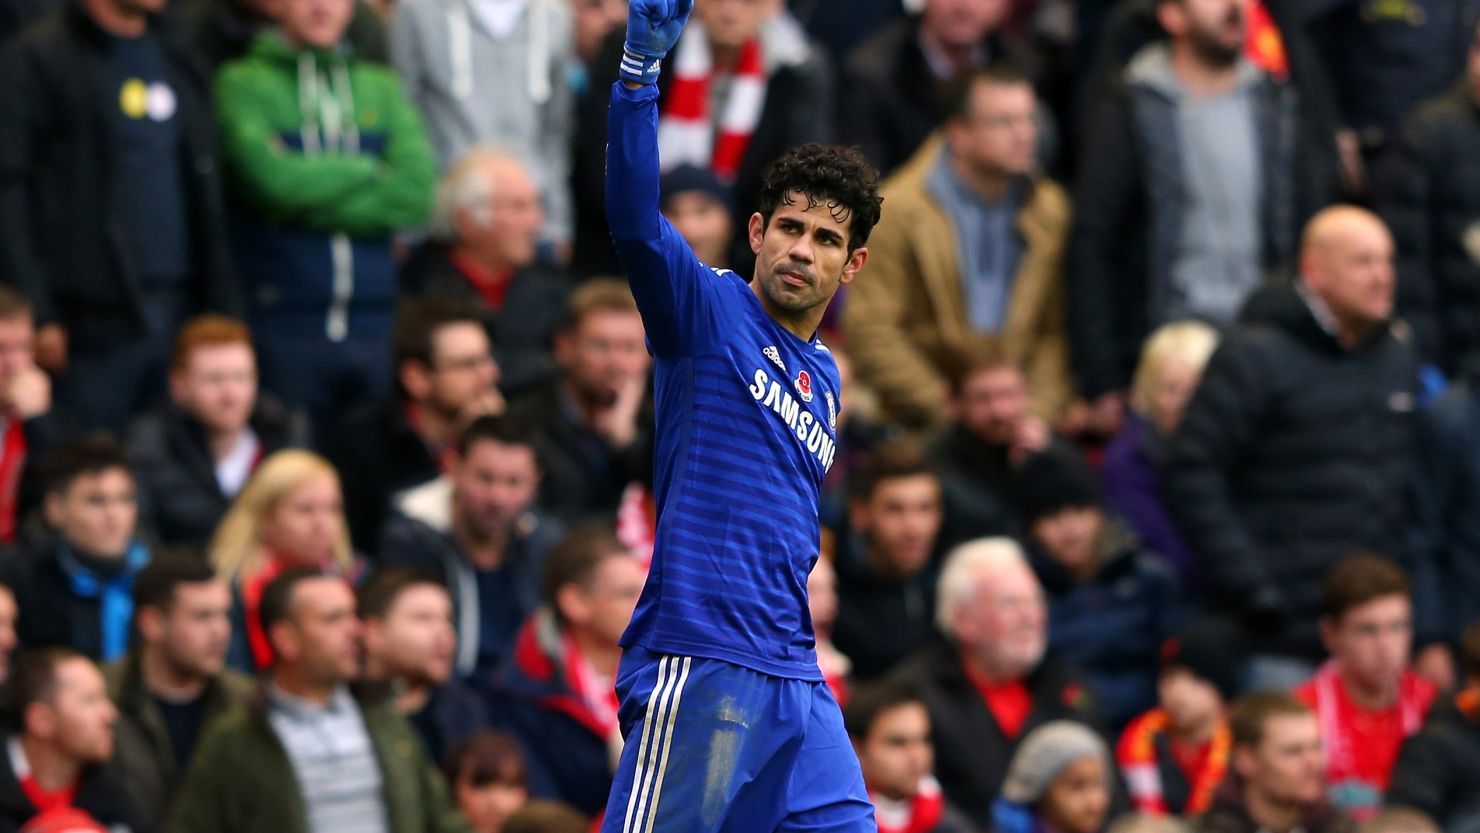 Diego Costa scored his tenth goal in the Premier League this season for Chelsea.